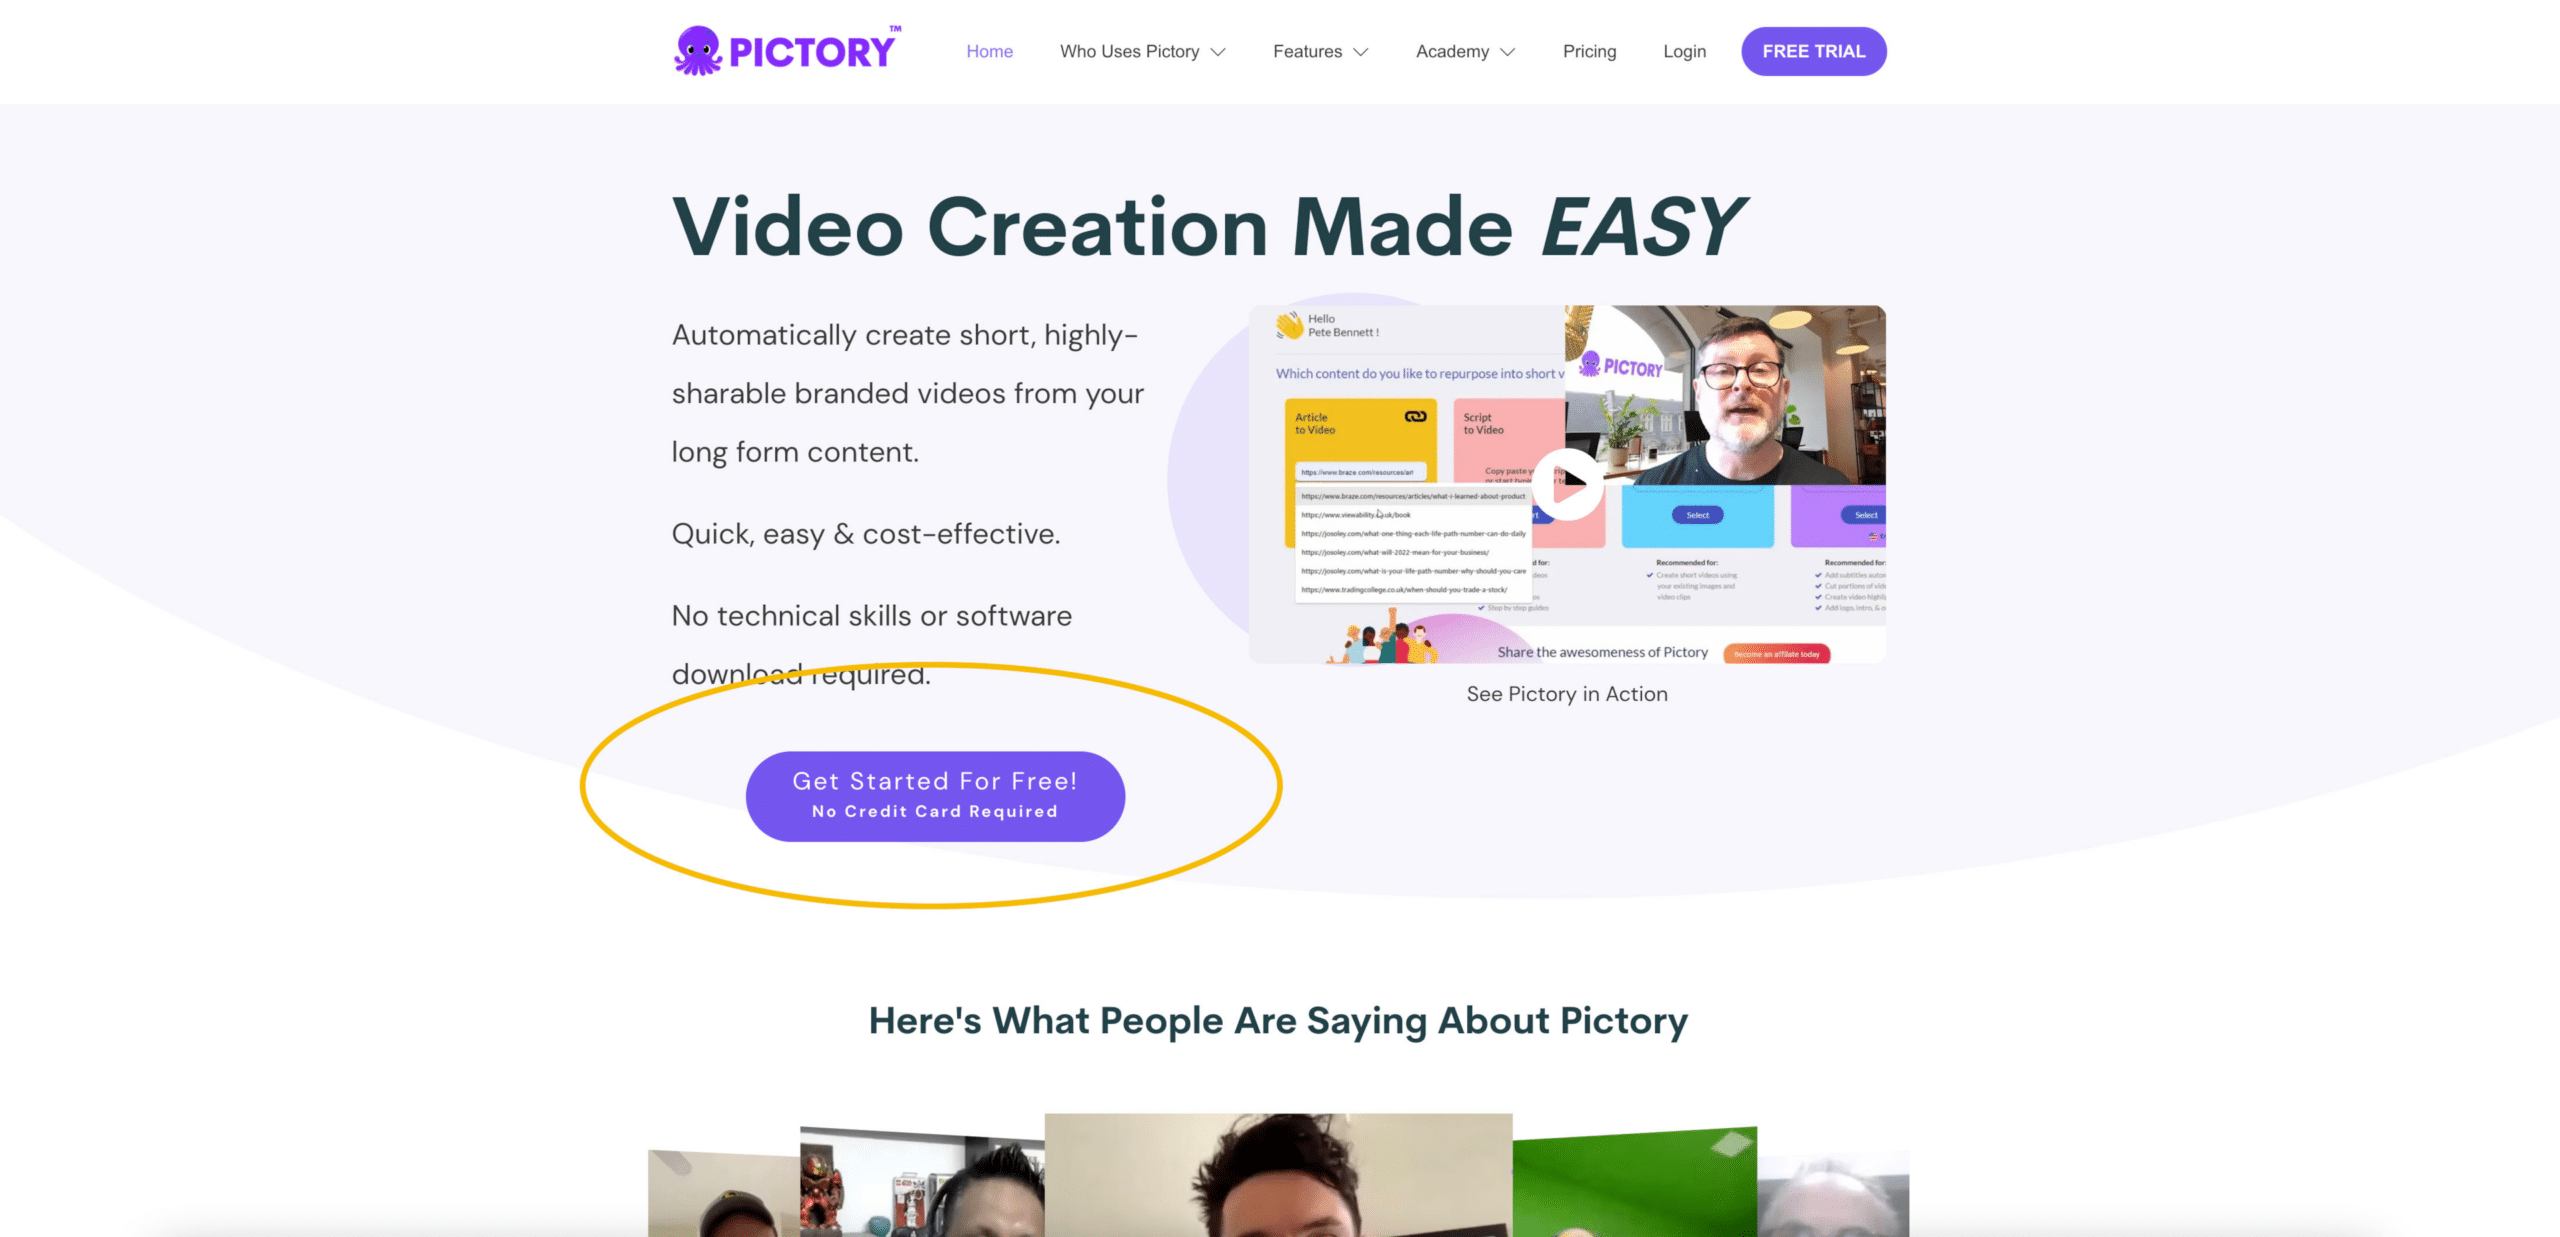 Setting up a Pictory account is simple, and you'll start by creating your free trial